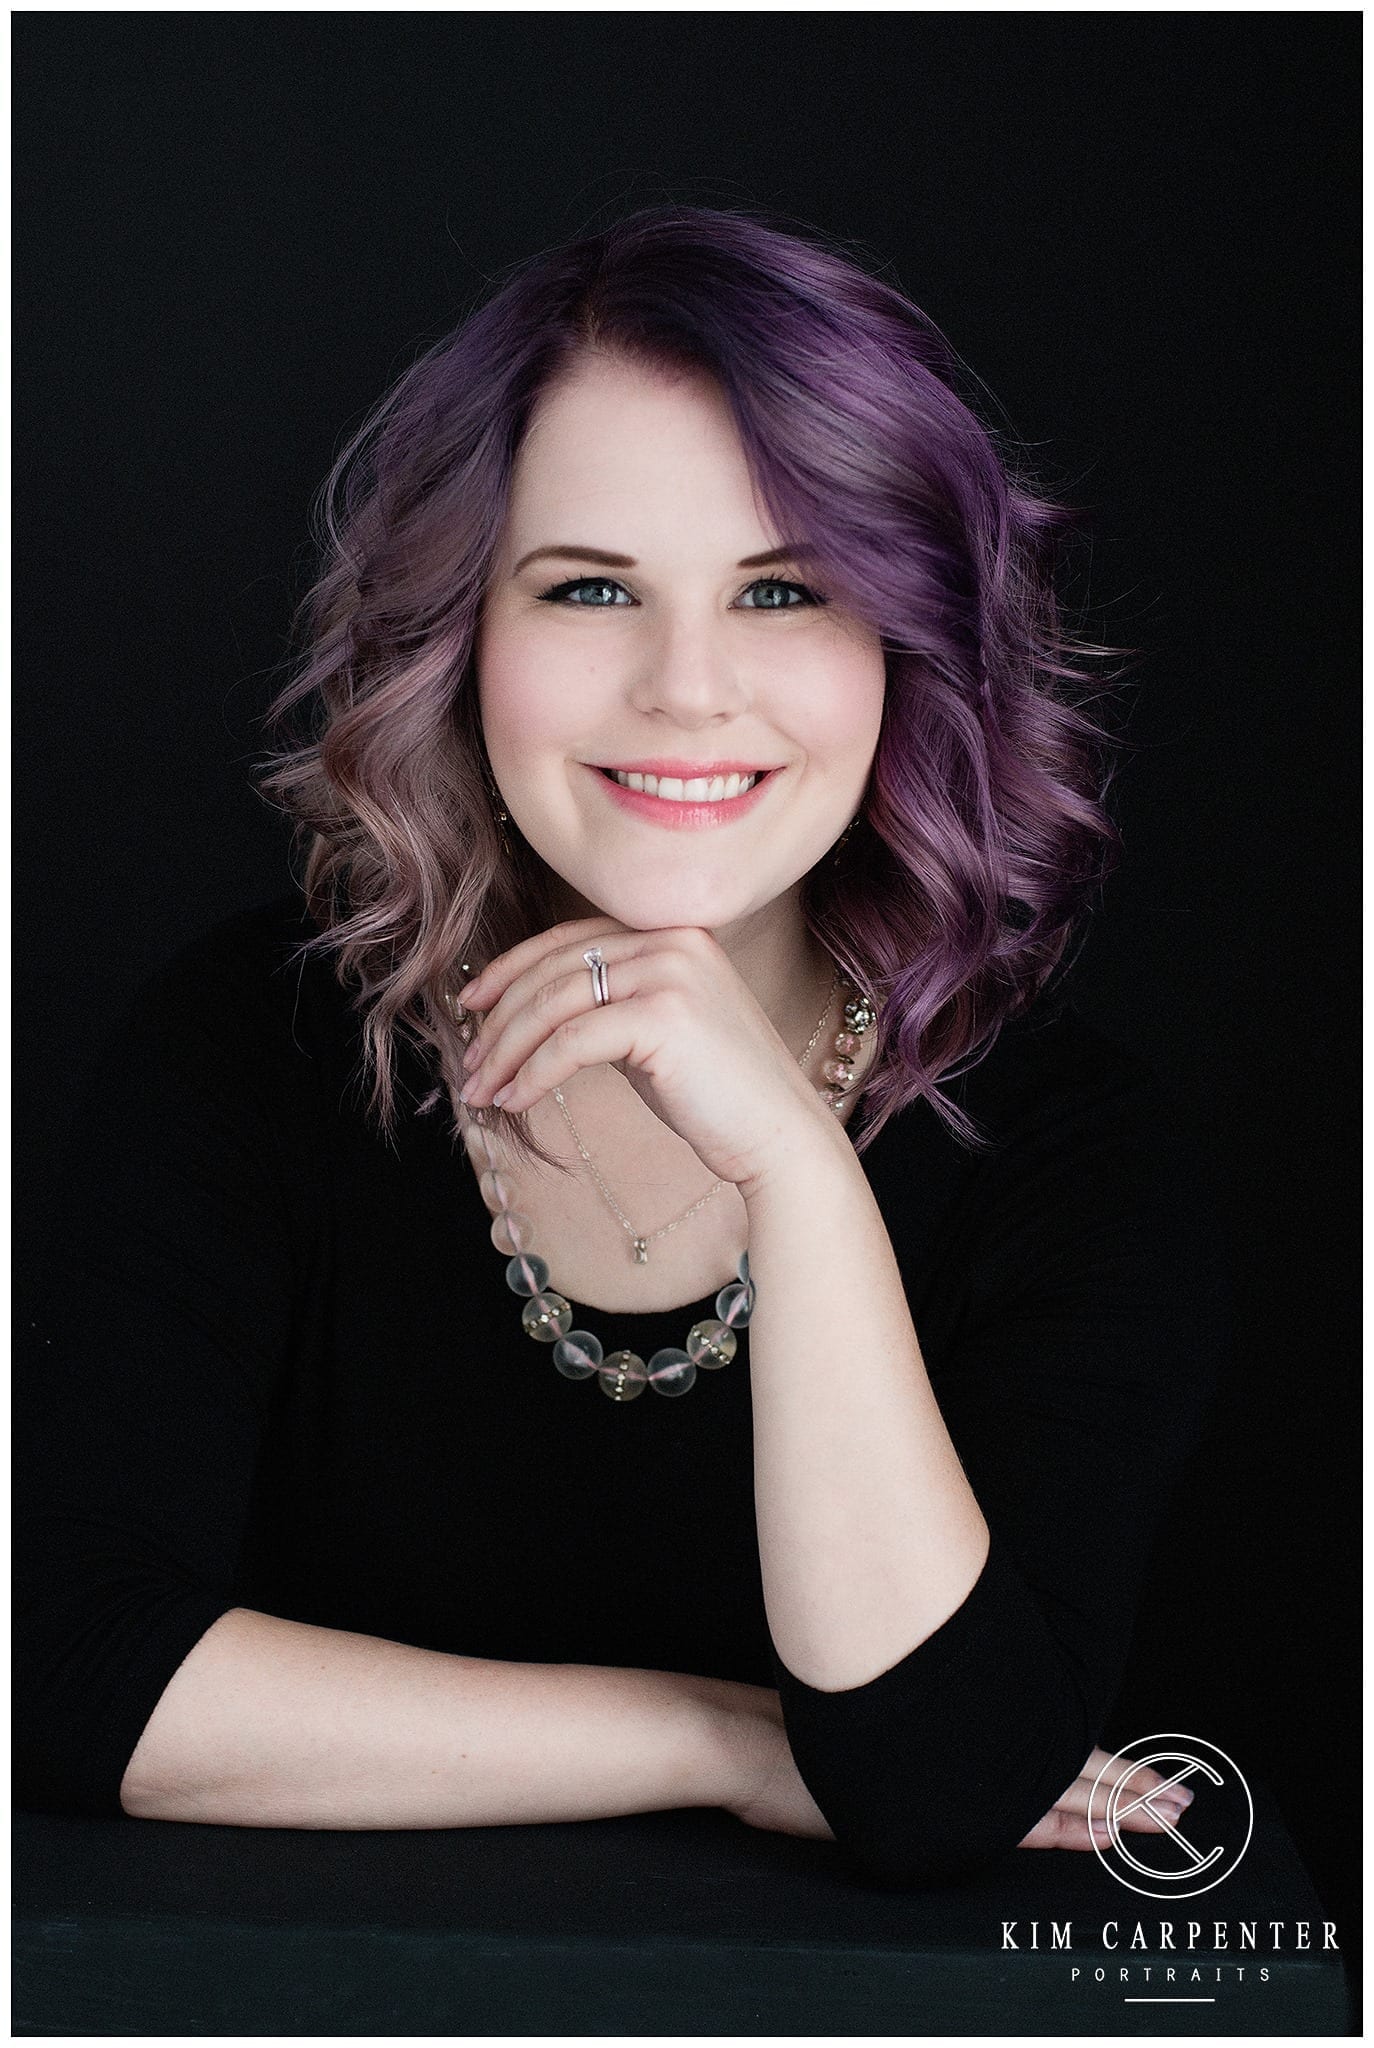 Woman with pastel purple hair posing for a professional headshots session.